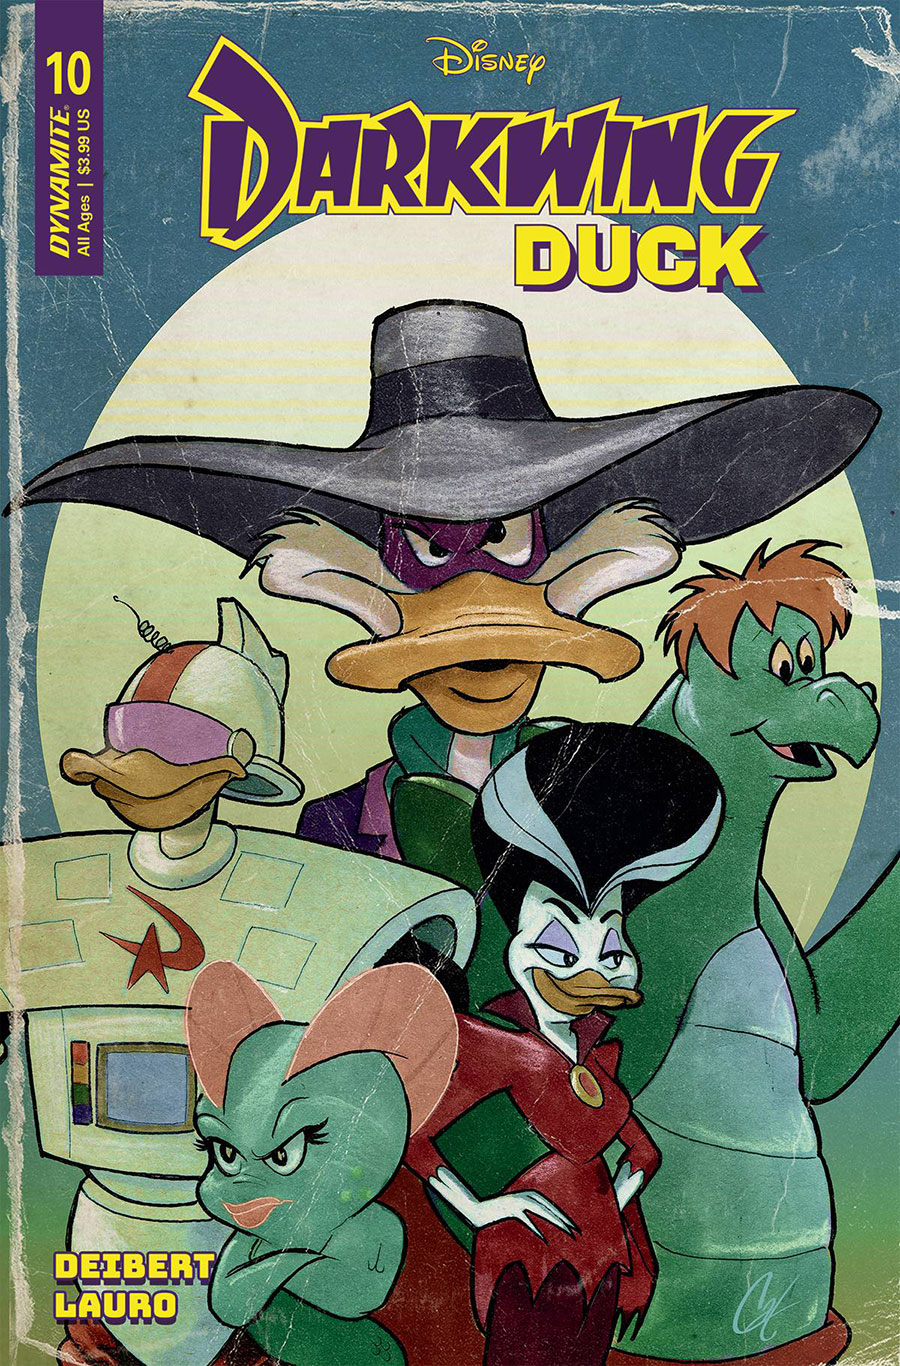 Darkwing Duck Vol 3 #10 Cover O Variant Cat Staggs Cover